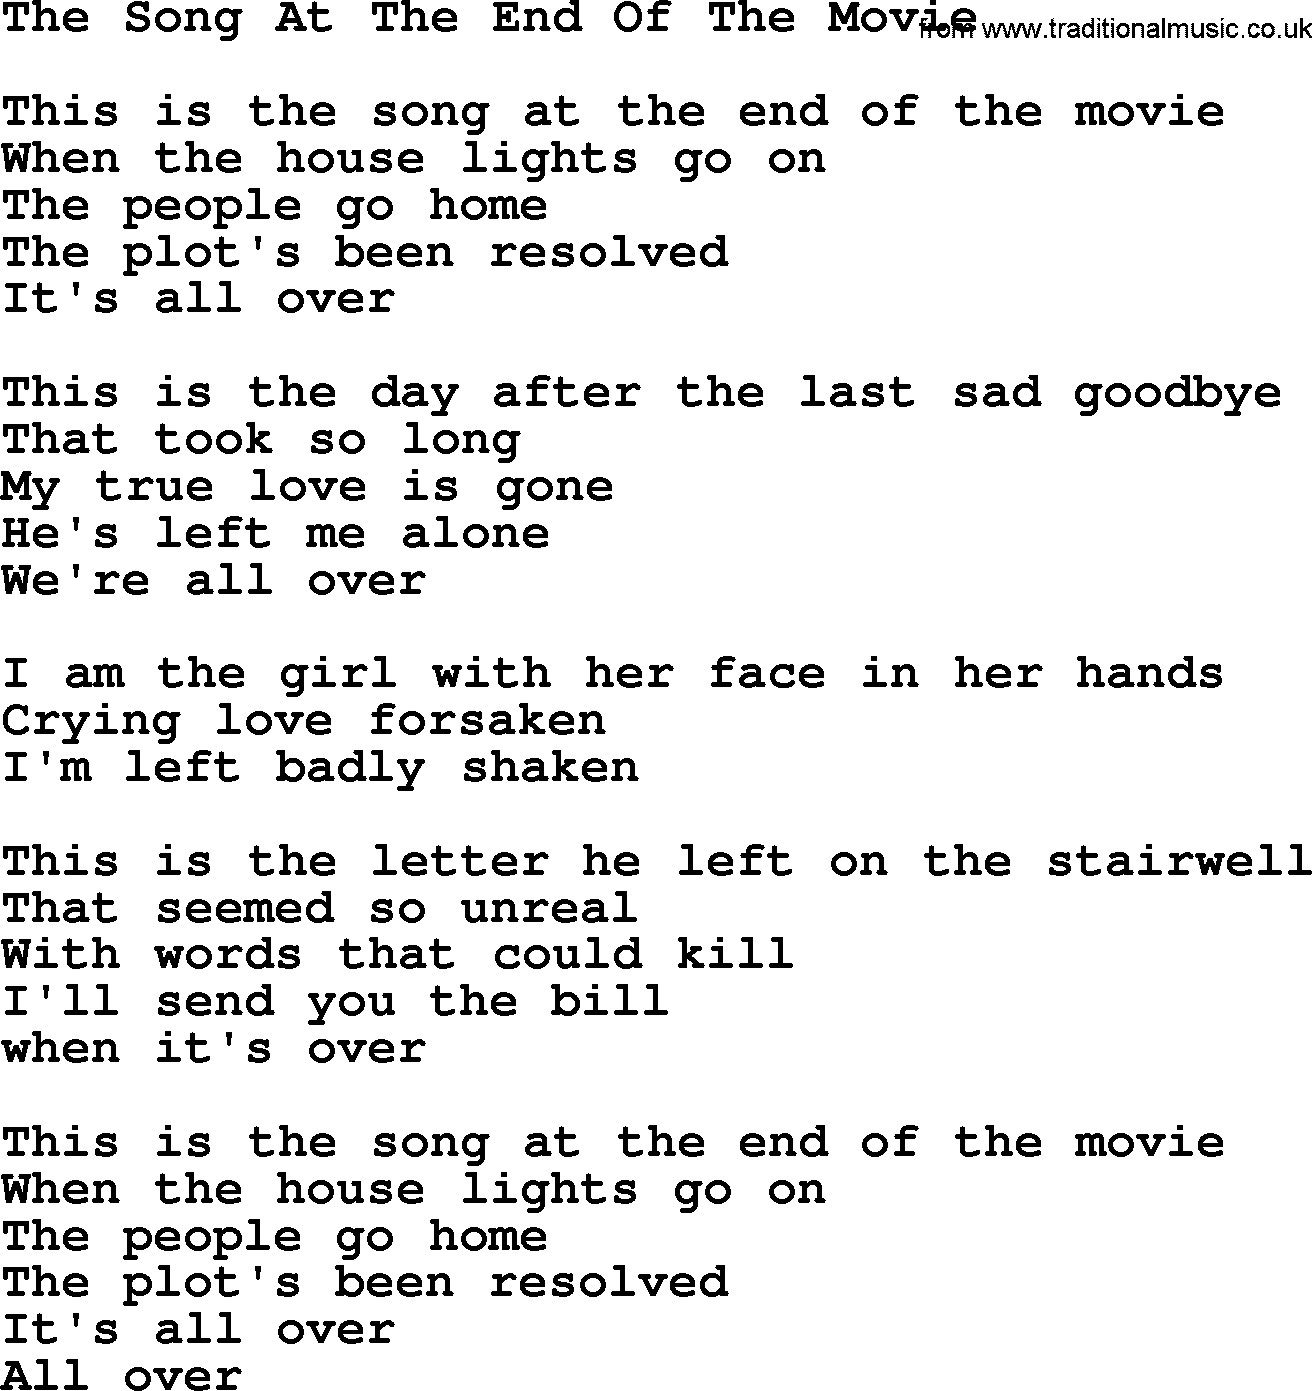 Joan Baez song The Song At The End Of The Movie, lyrics